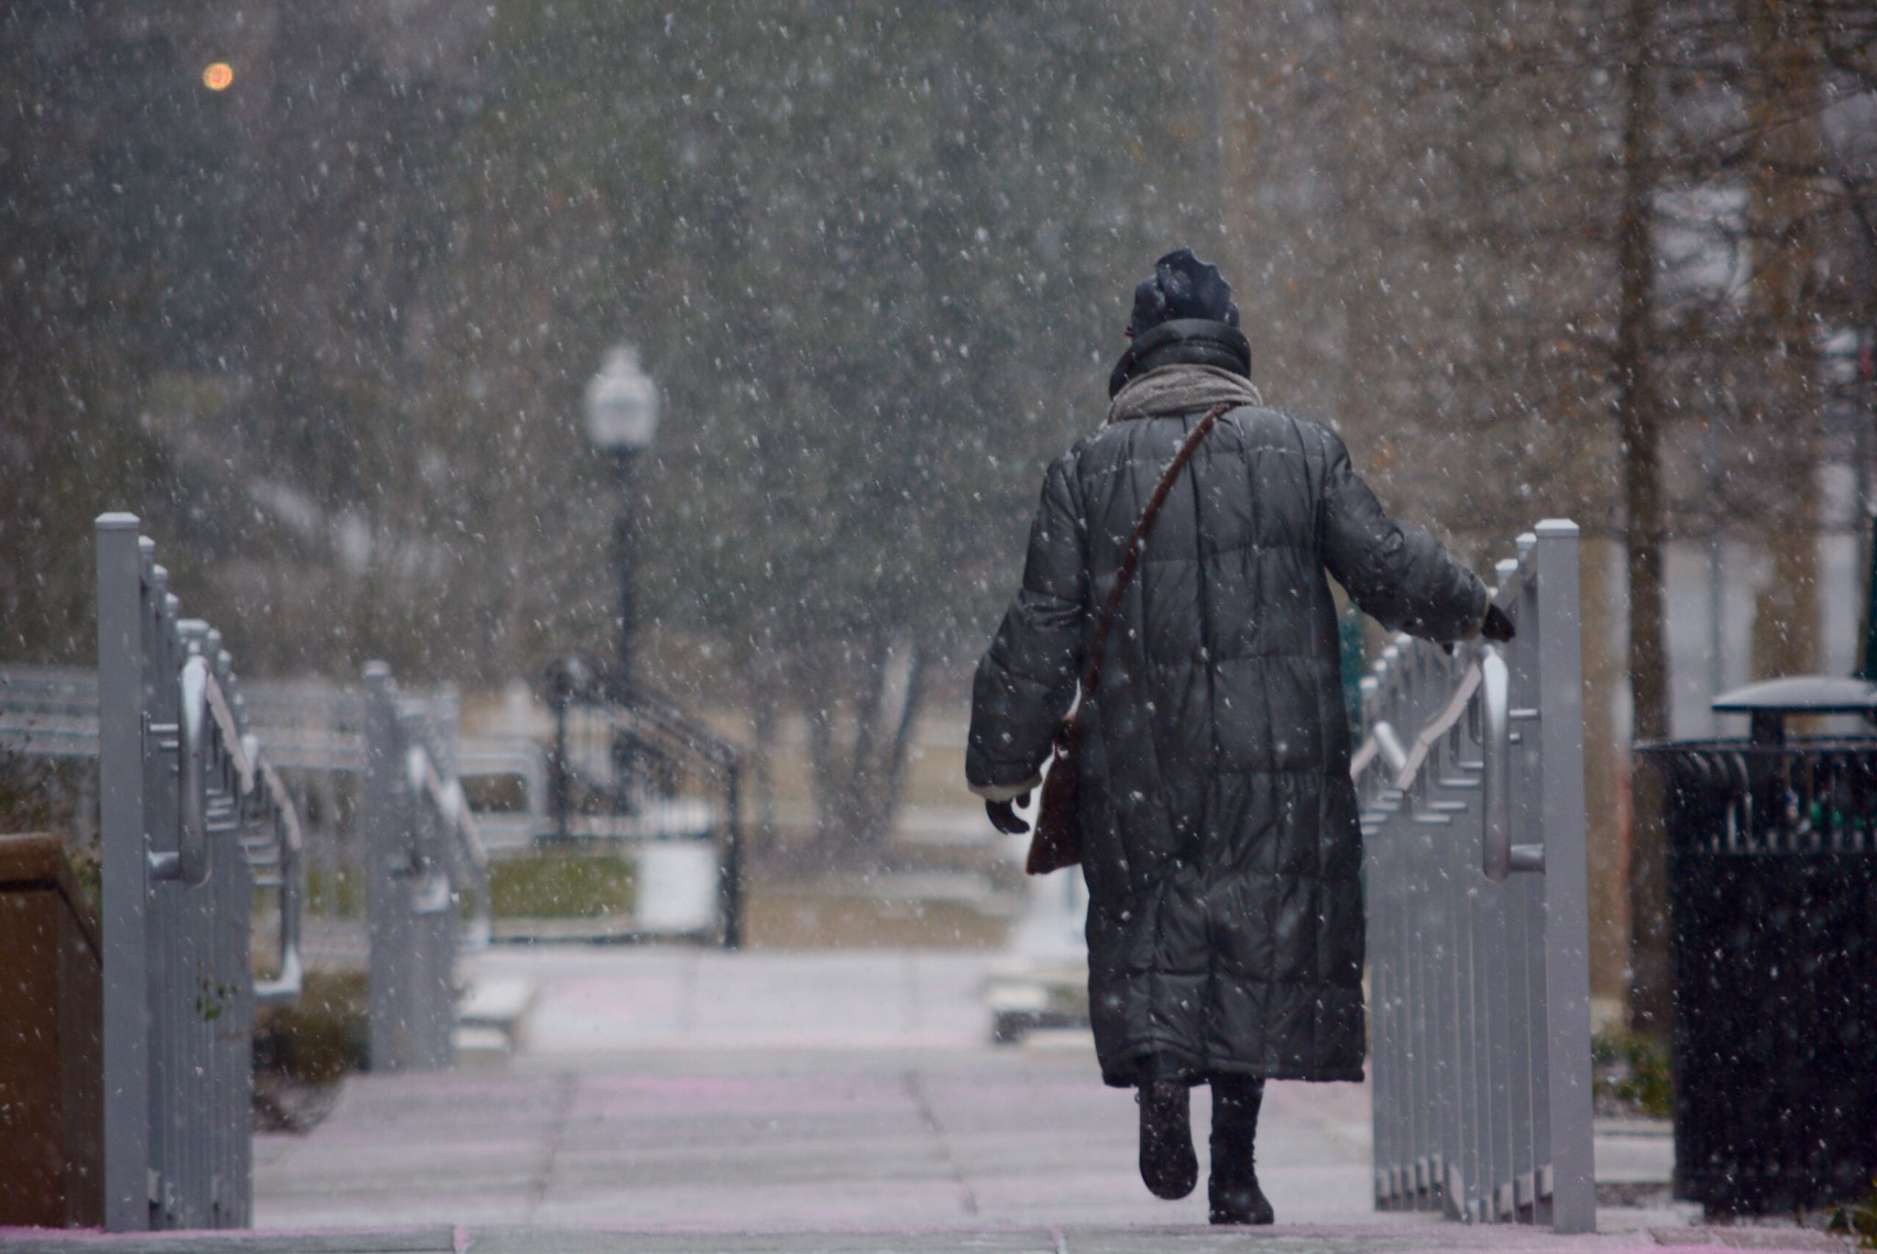 Snow falls steadily Saturday morning in Cathedral Commons in D.C. (WTOP/Dave Dildine)